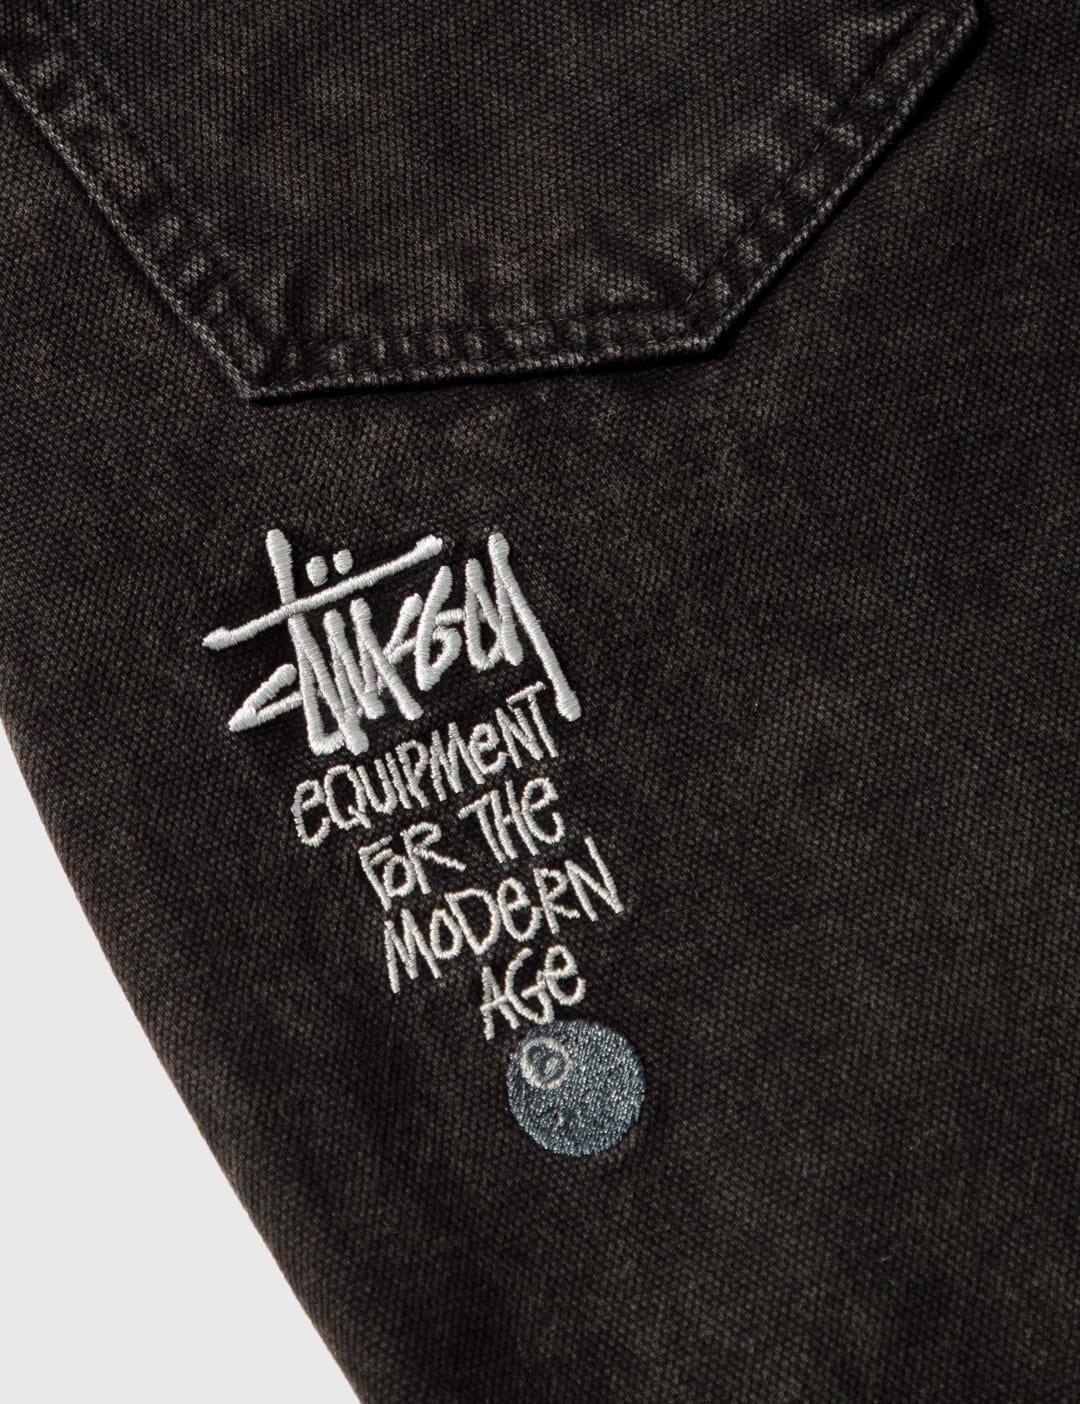 Stüssy - WASHED CANVAS BIG OL' JEANS | HBX - Globally Curated